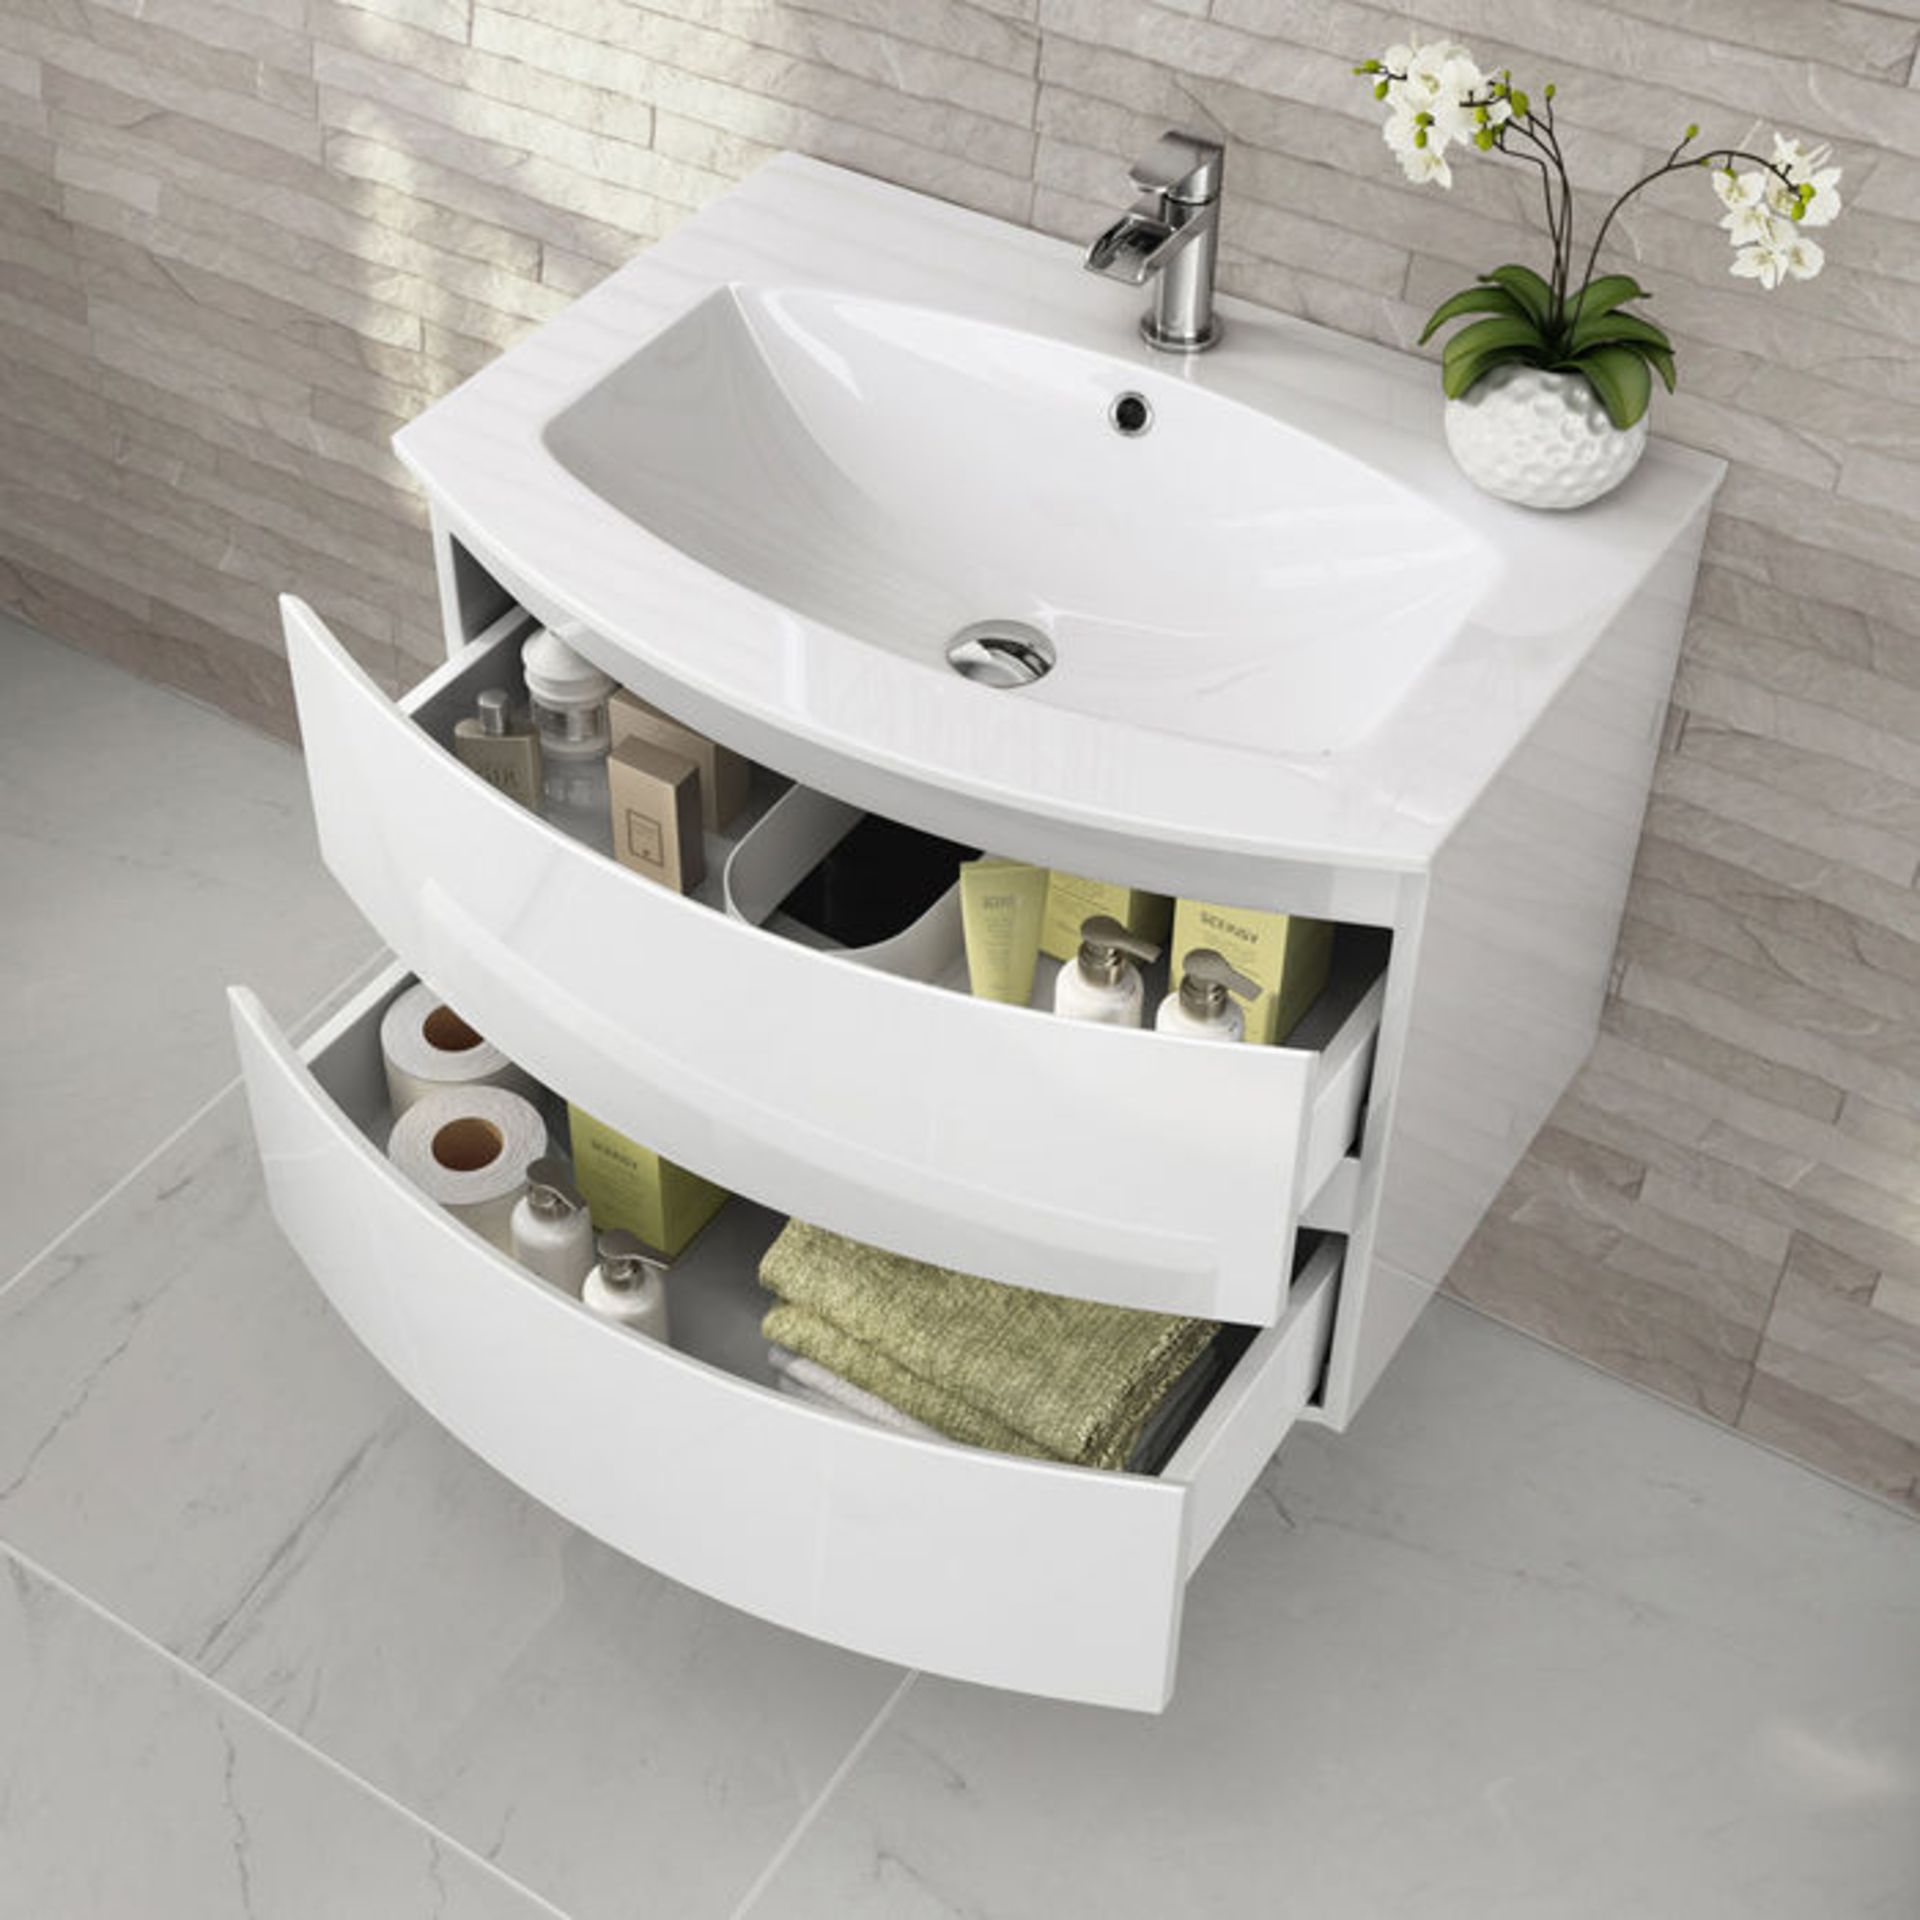 NEW & BOXED 700mm Amelie High Gloss White Curved Vanity Unit - Wall Hung. Comes complete with b... - Image 2 of 4